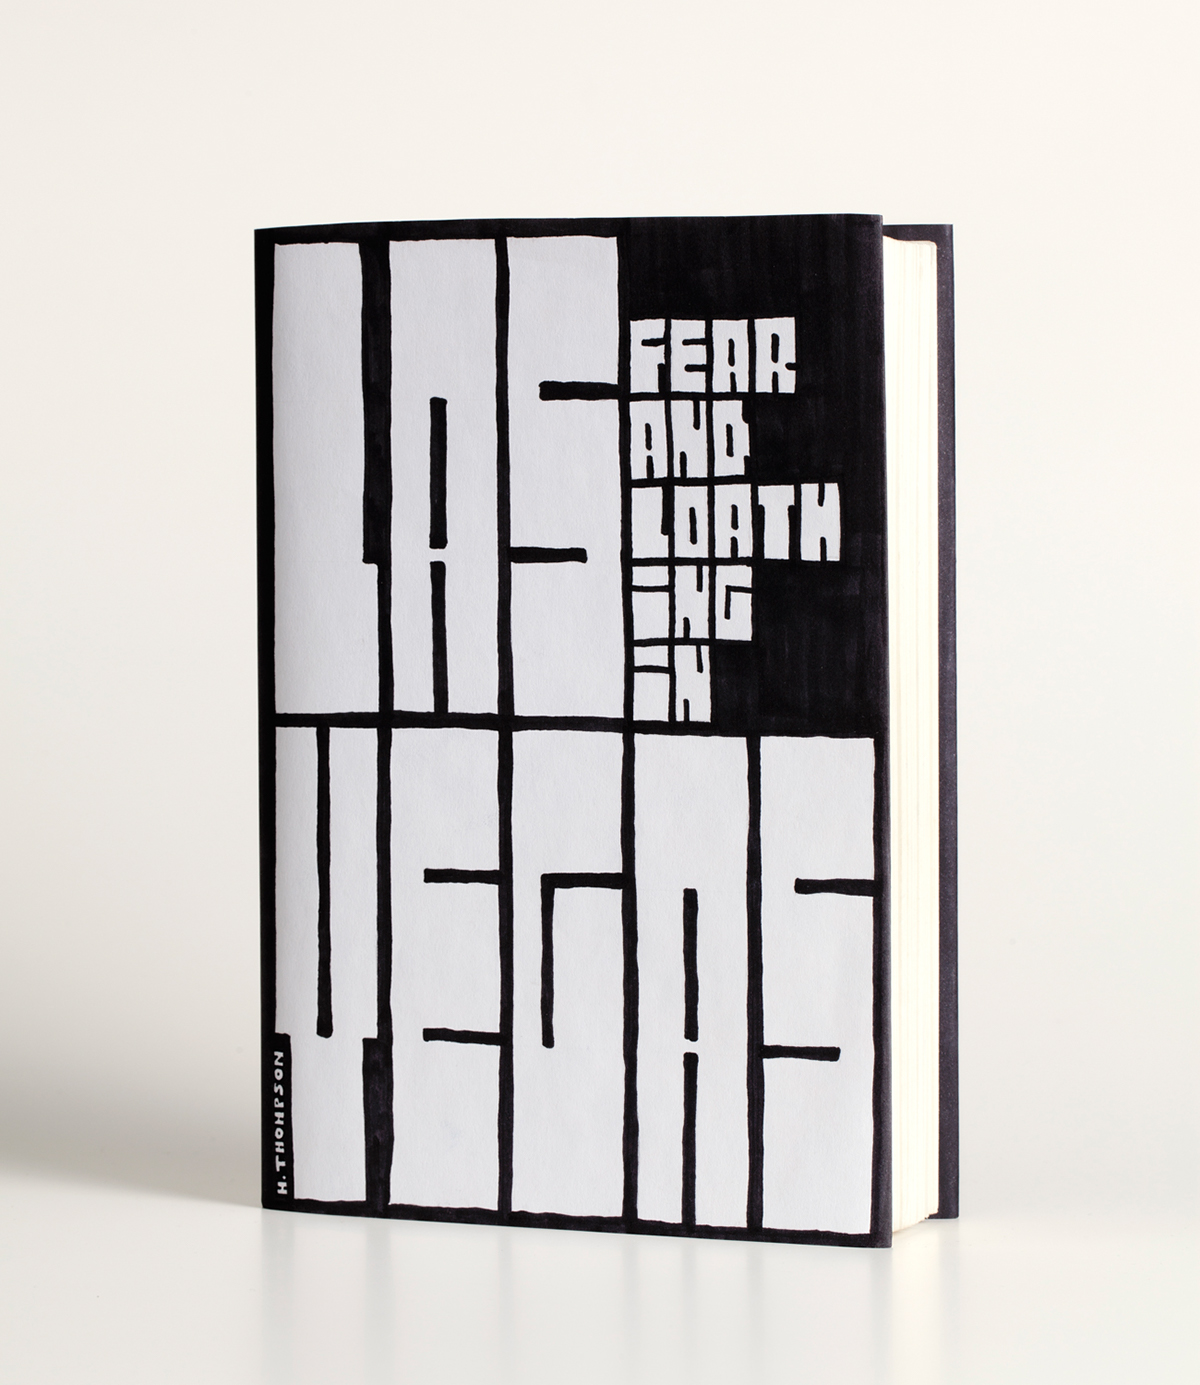 Fear and Loathing in Las Vegas Hunter S. Thompson the road cormac mc carthy black and white HAND LETTERING book cover